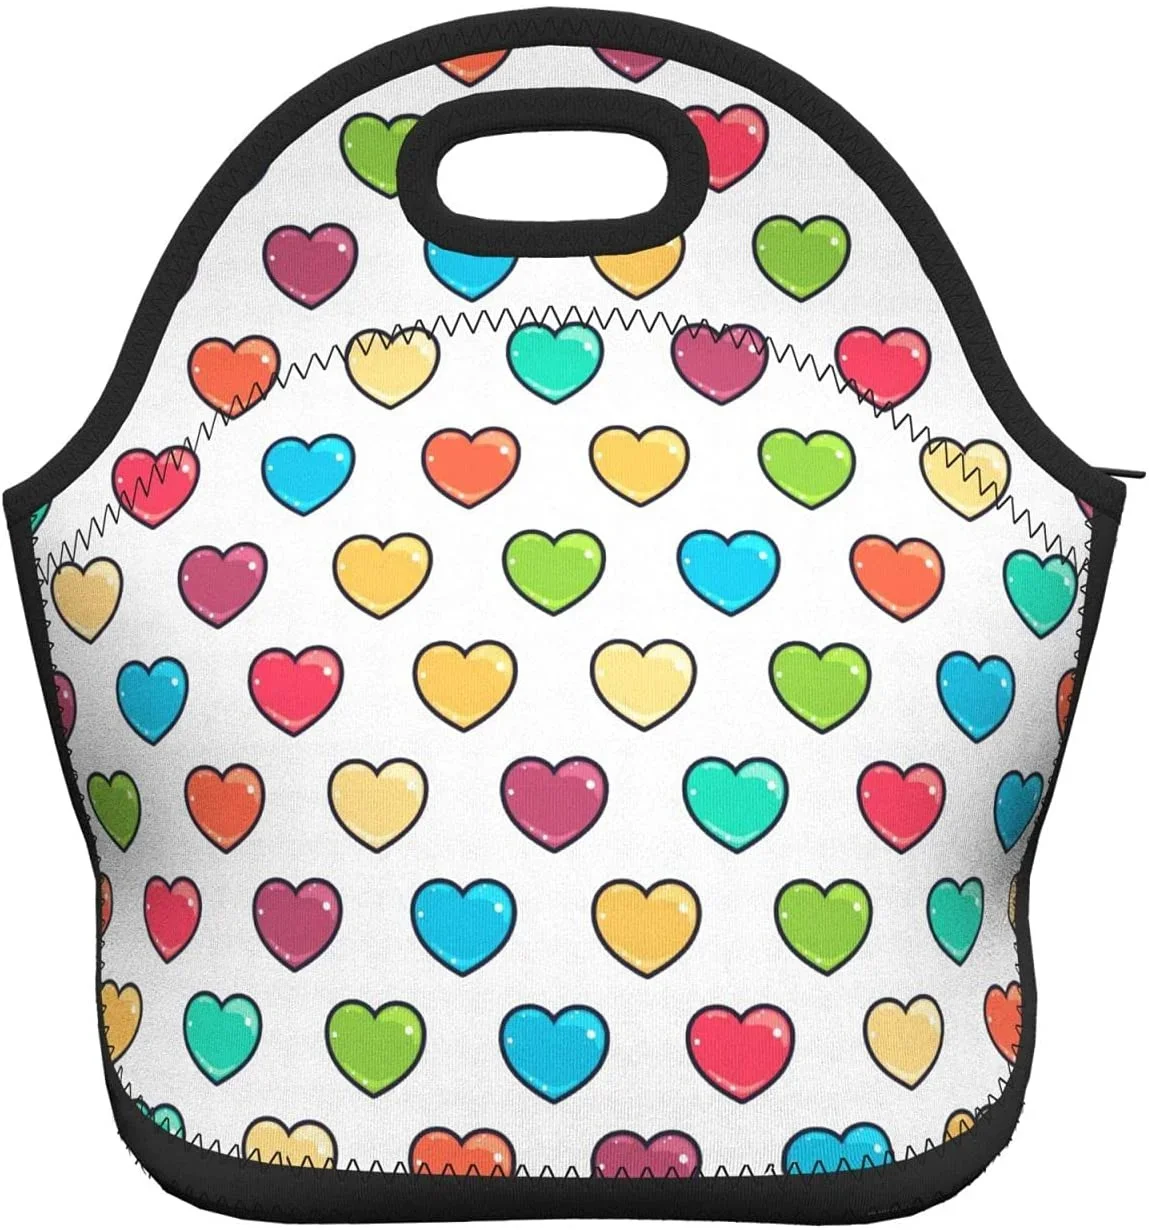 

Colorful Hearts Neoprene Lunch Bag Boxs,Durable Thermal Tote Bag Organizer Cooler Bento Bags Lunchbox Handbag For Work School